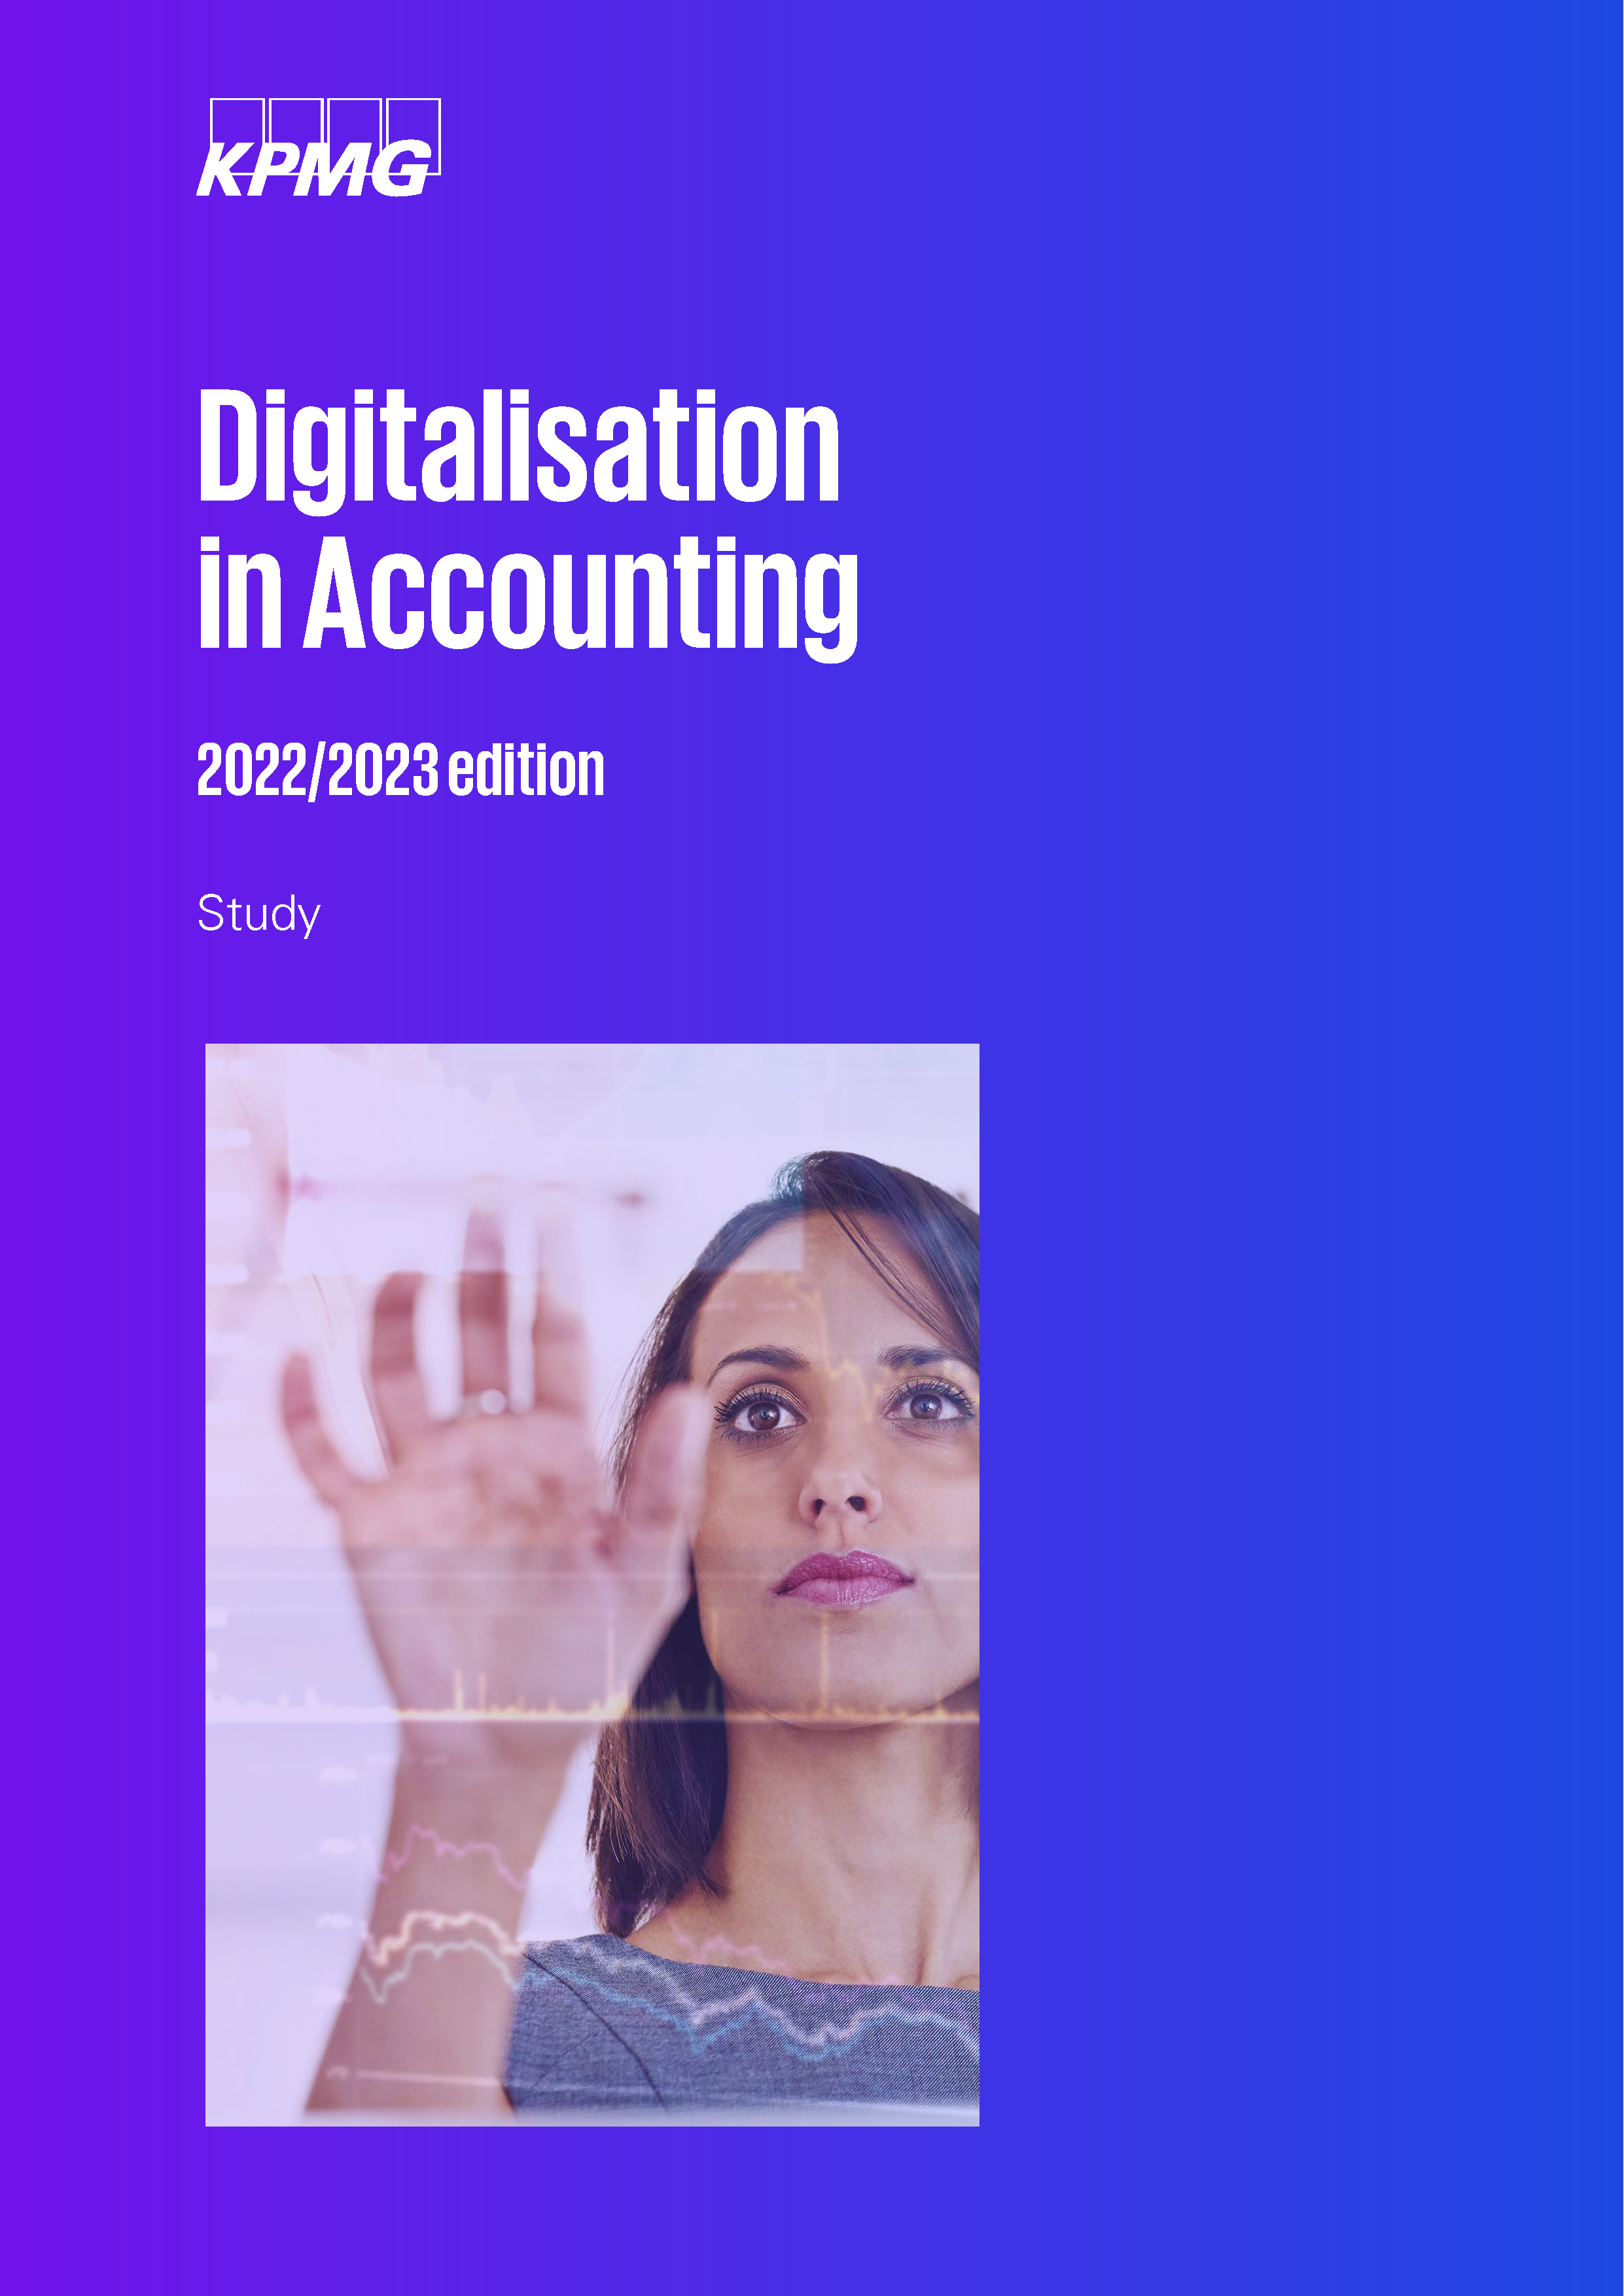 KPMG_Study_Digitalisation_in_Accounting_edition_2022-2023-cover